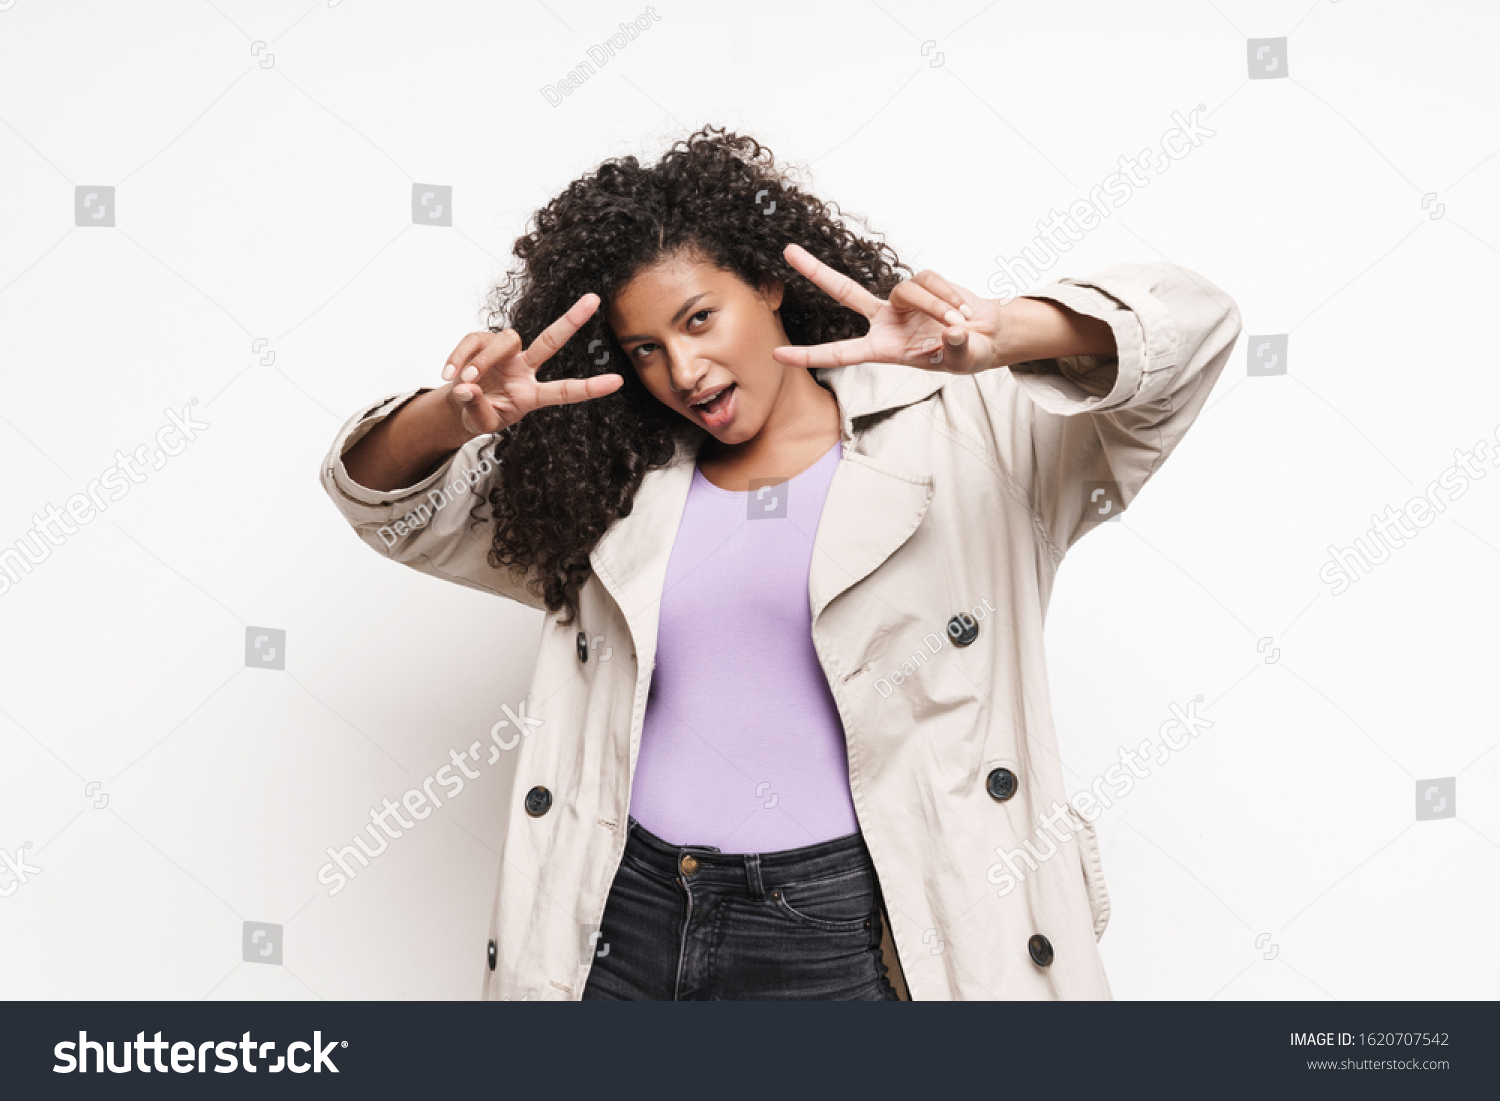 Cheerful playful attractive young african woman wearing autumn jacket having fun isolated over white background, showing peace gesture #1620707542